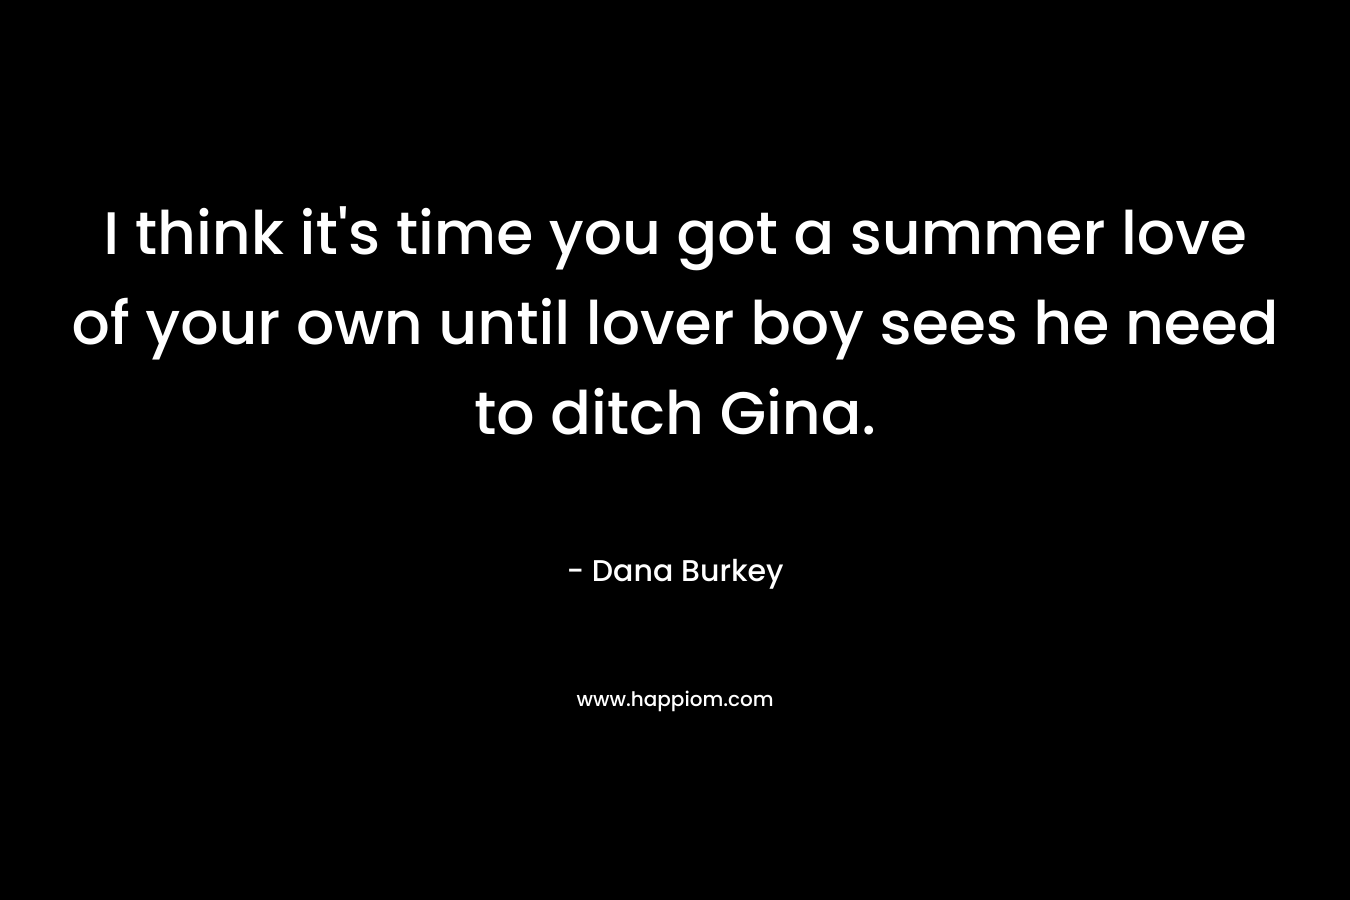 I think it's time you got a summer love of your own until lover boy sees he need to ditch Gina.